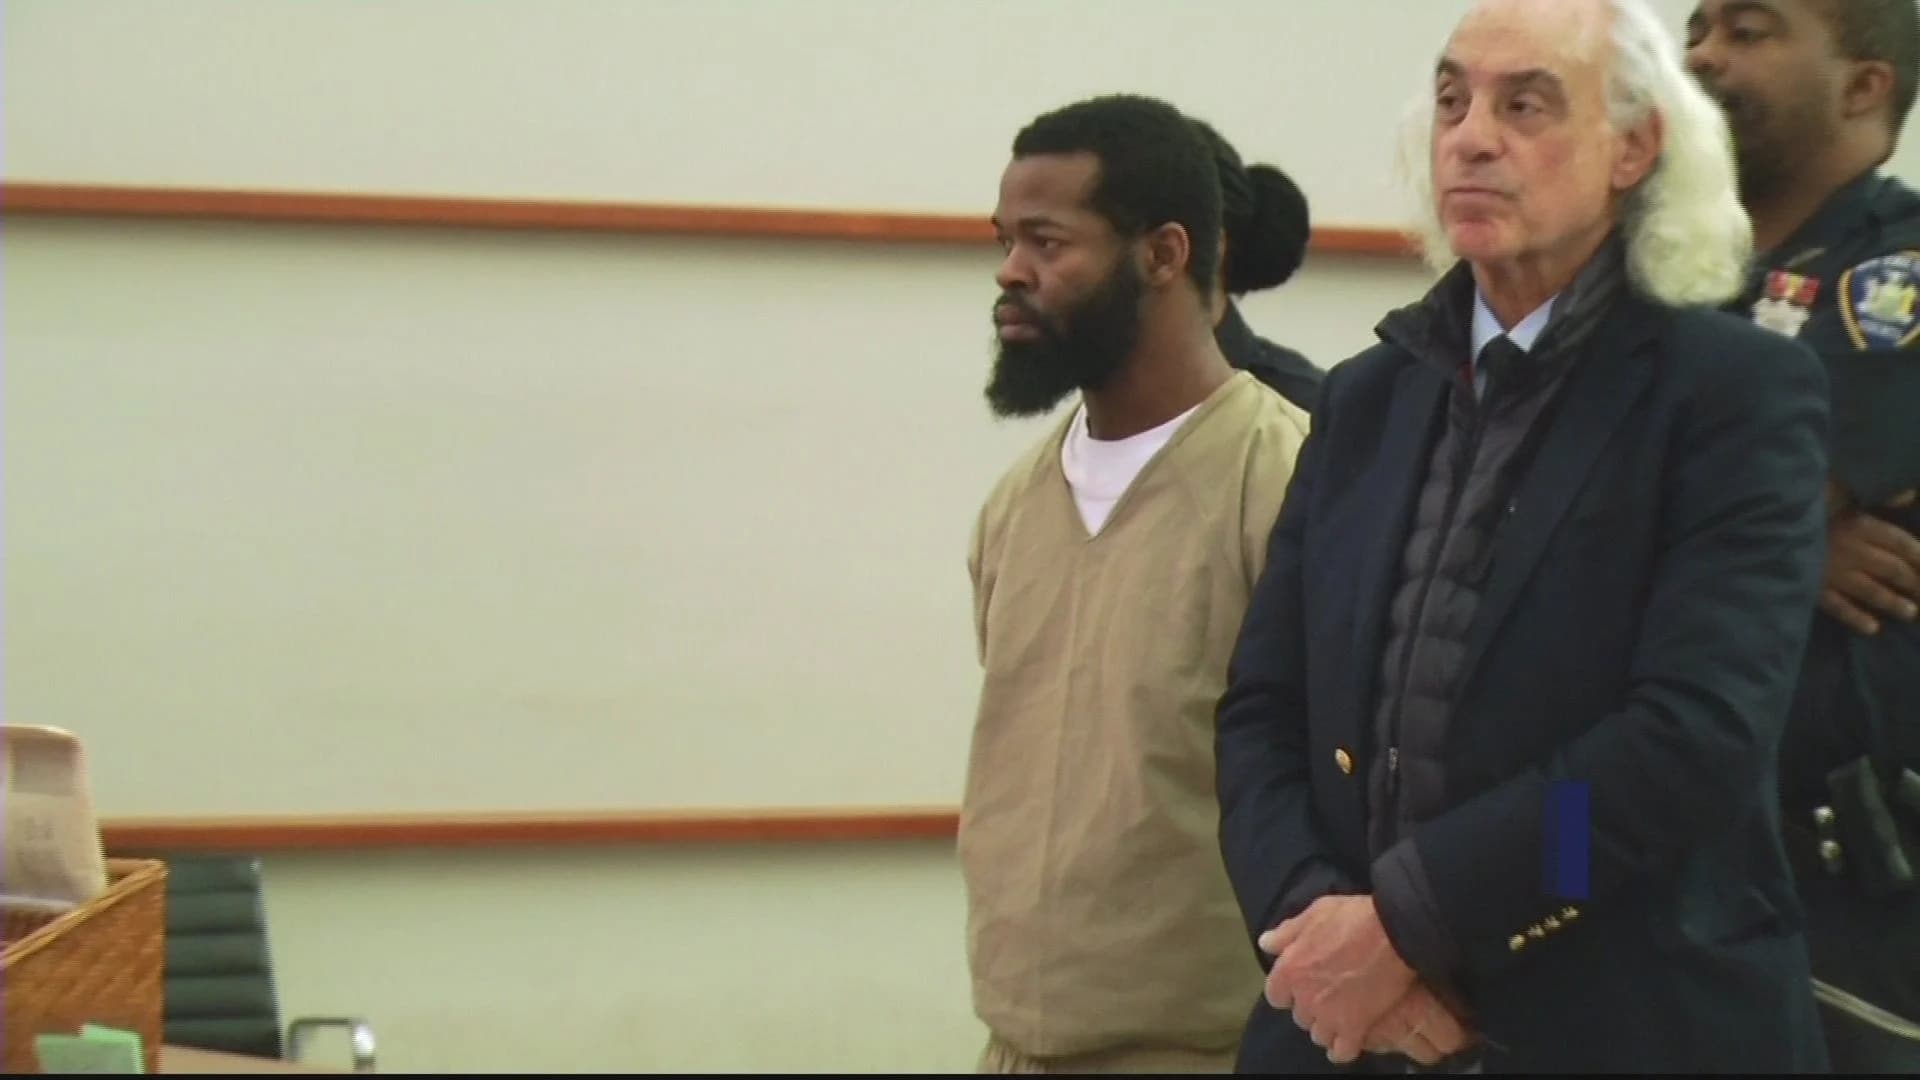 Fatal Norwood shooting suspect Jamel Burney pleads not guilty in death of Michael Vermong